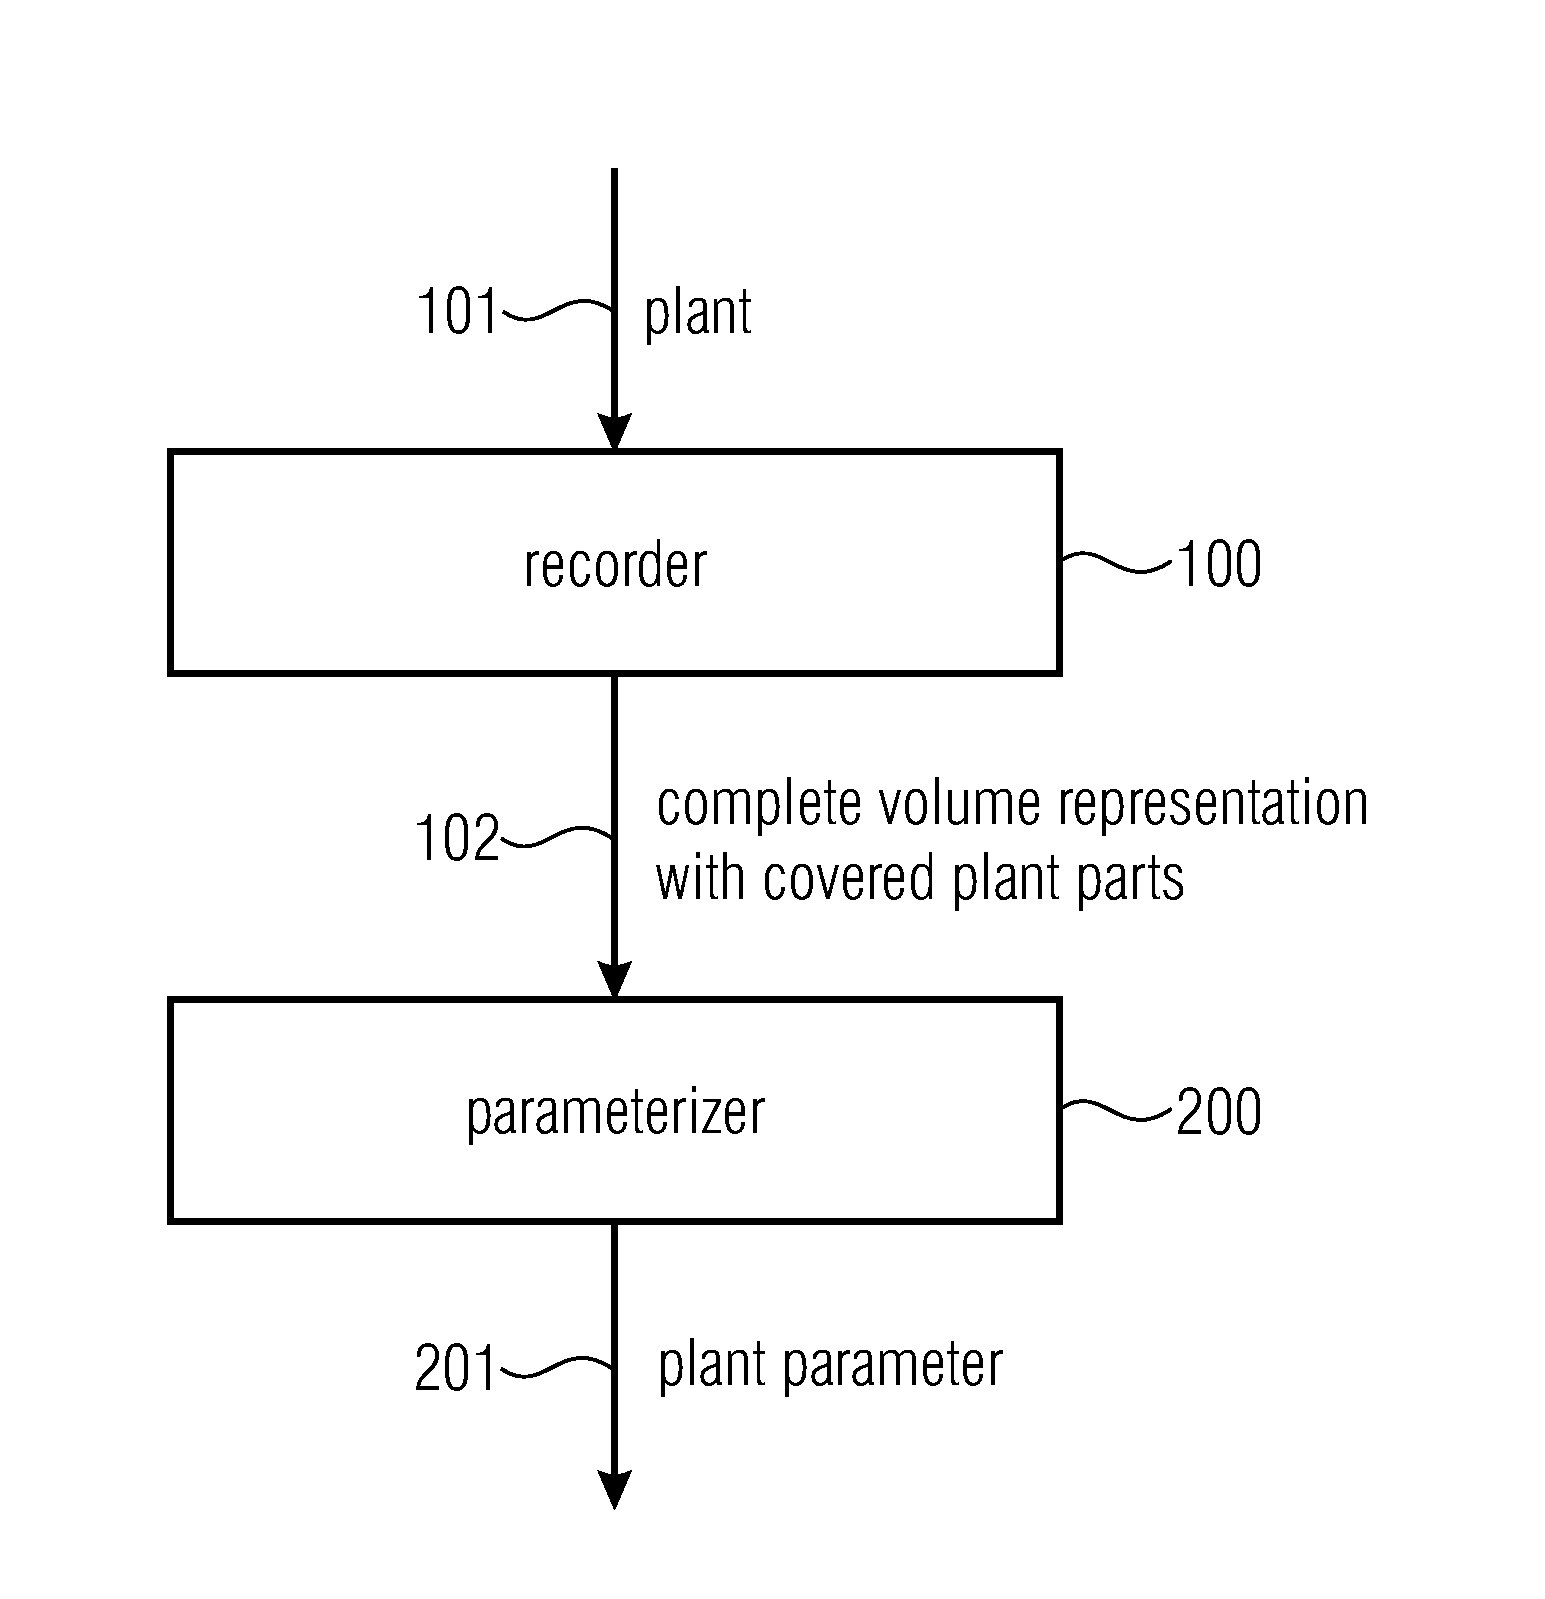 Apparatus and method for parameterizing a plant